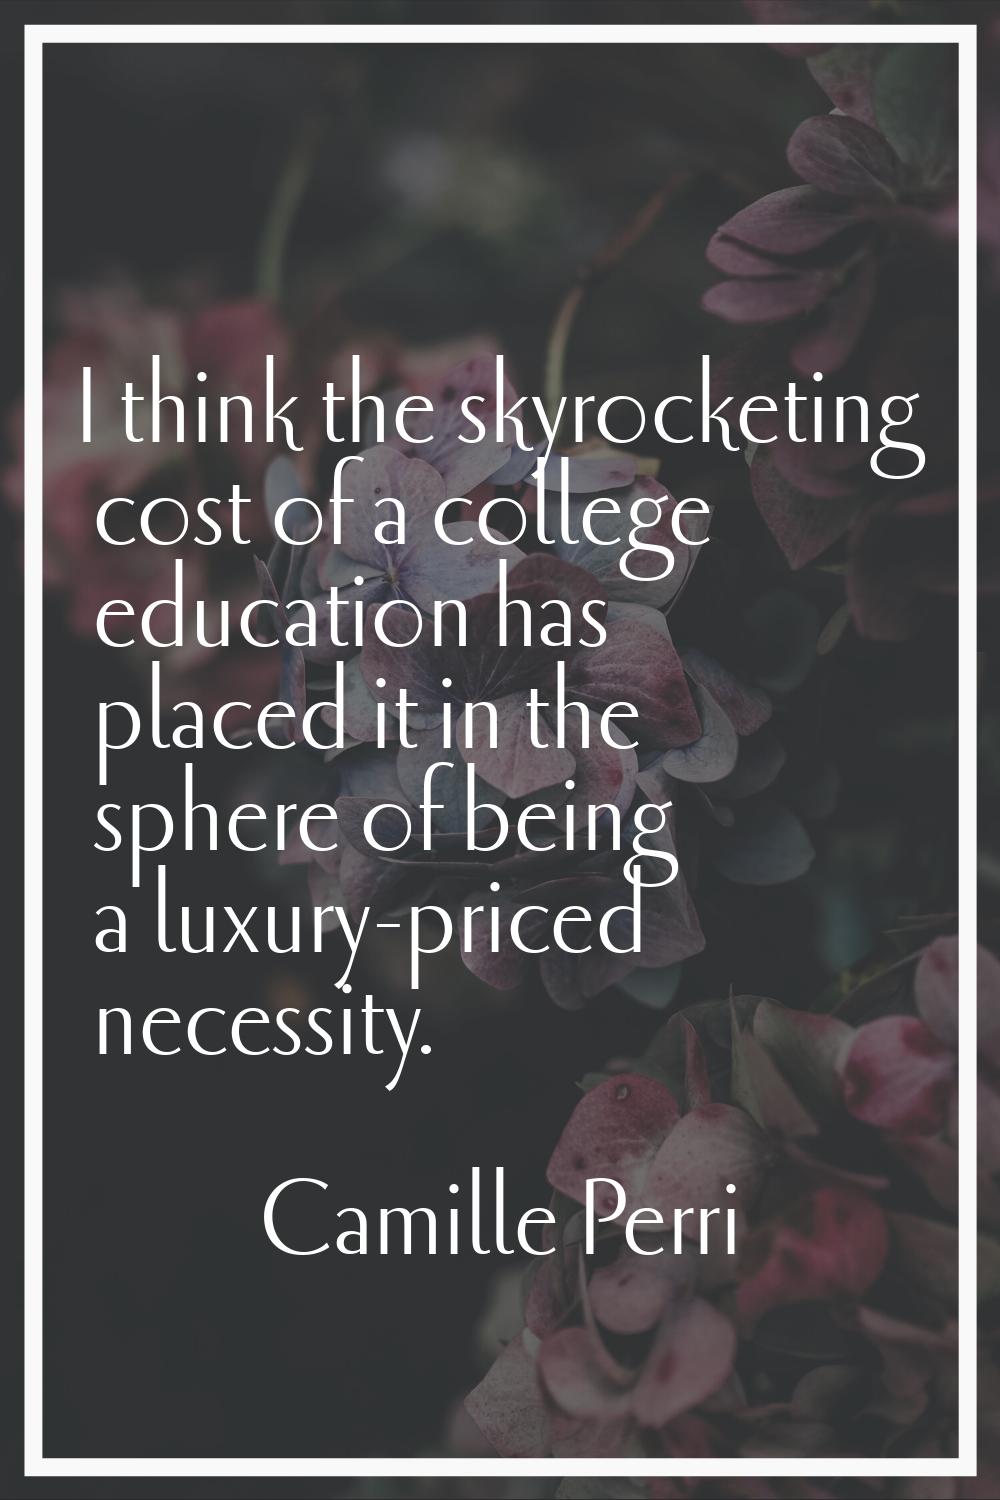 I think the skyrocketing cost of a college education has placed it in the sphere of being a luxury-